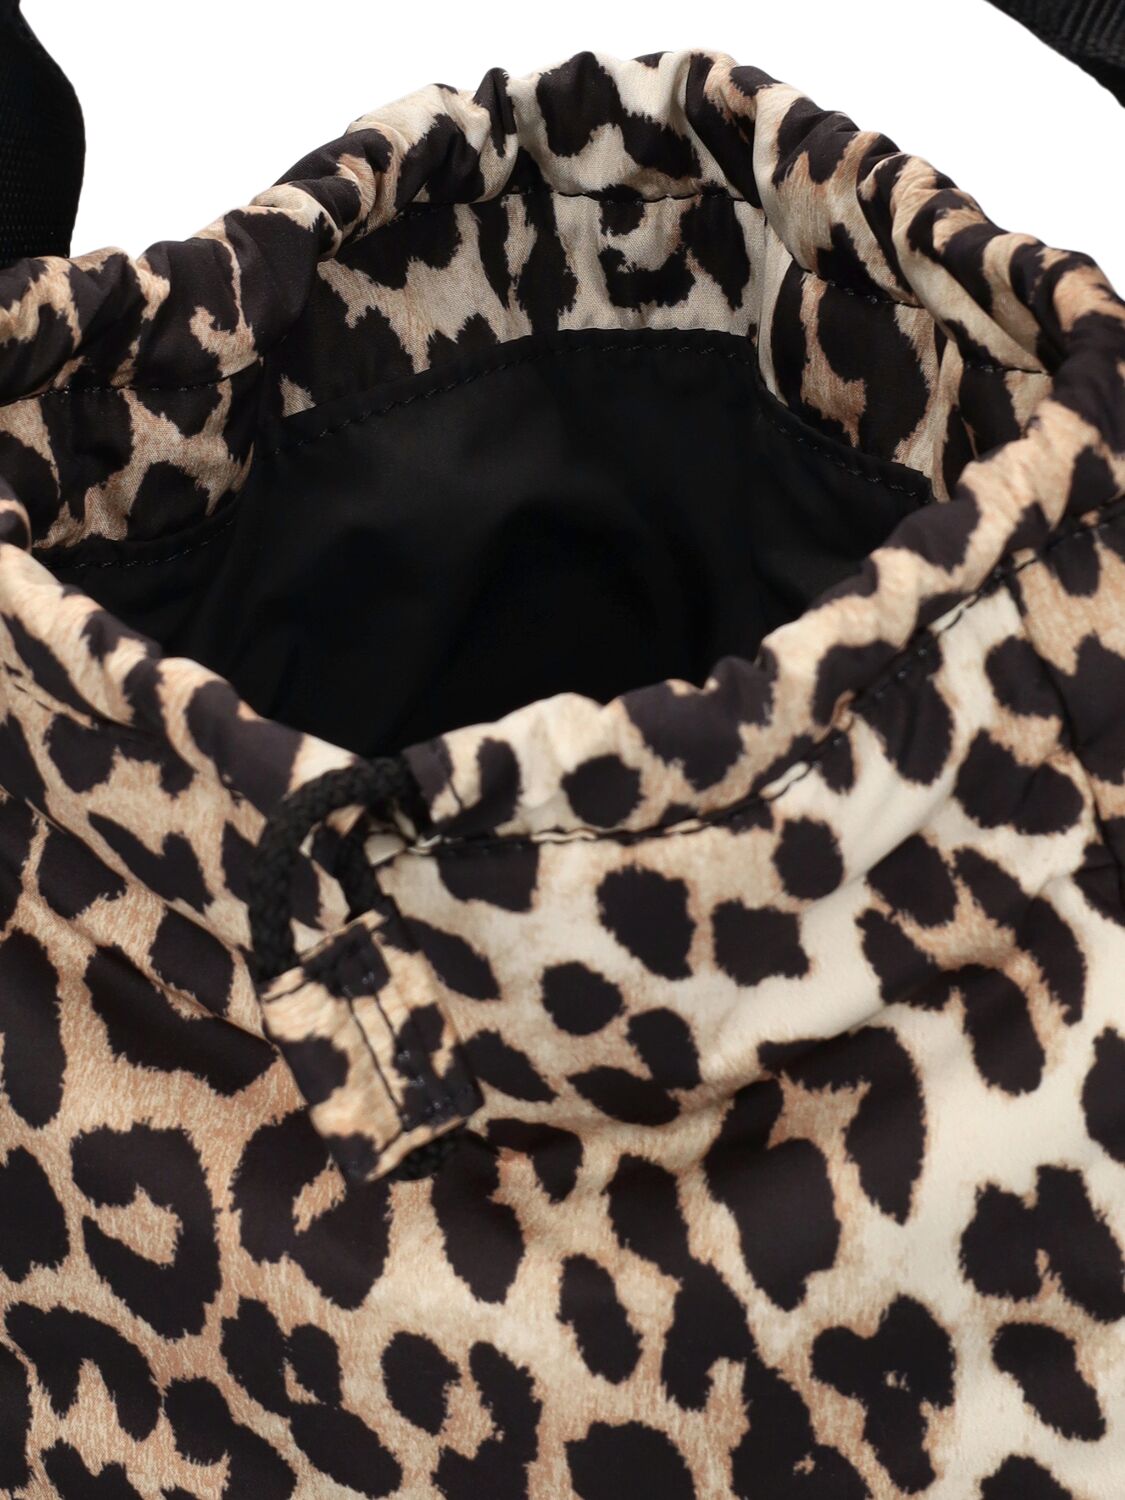 Shop Ganni Recycled Printed Tech Top Handle Bag In Leopard